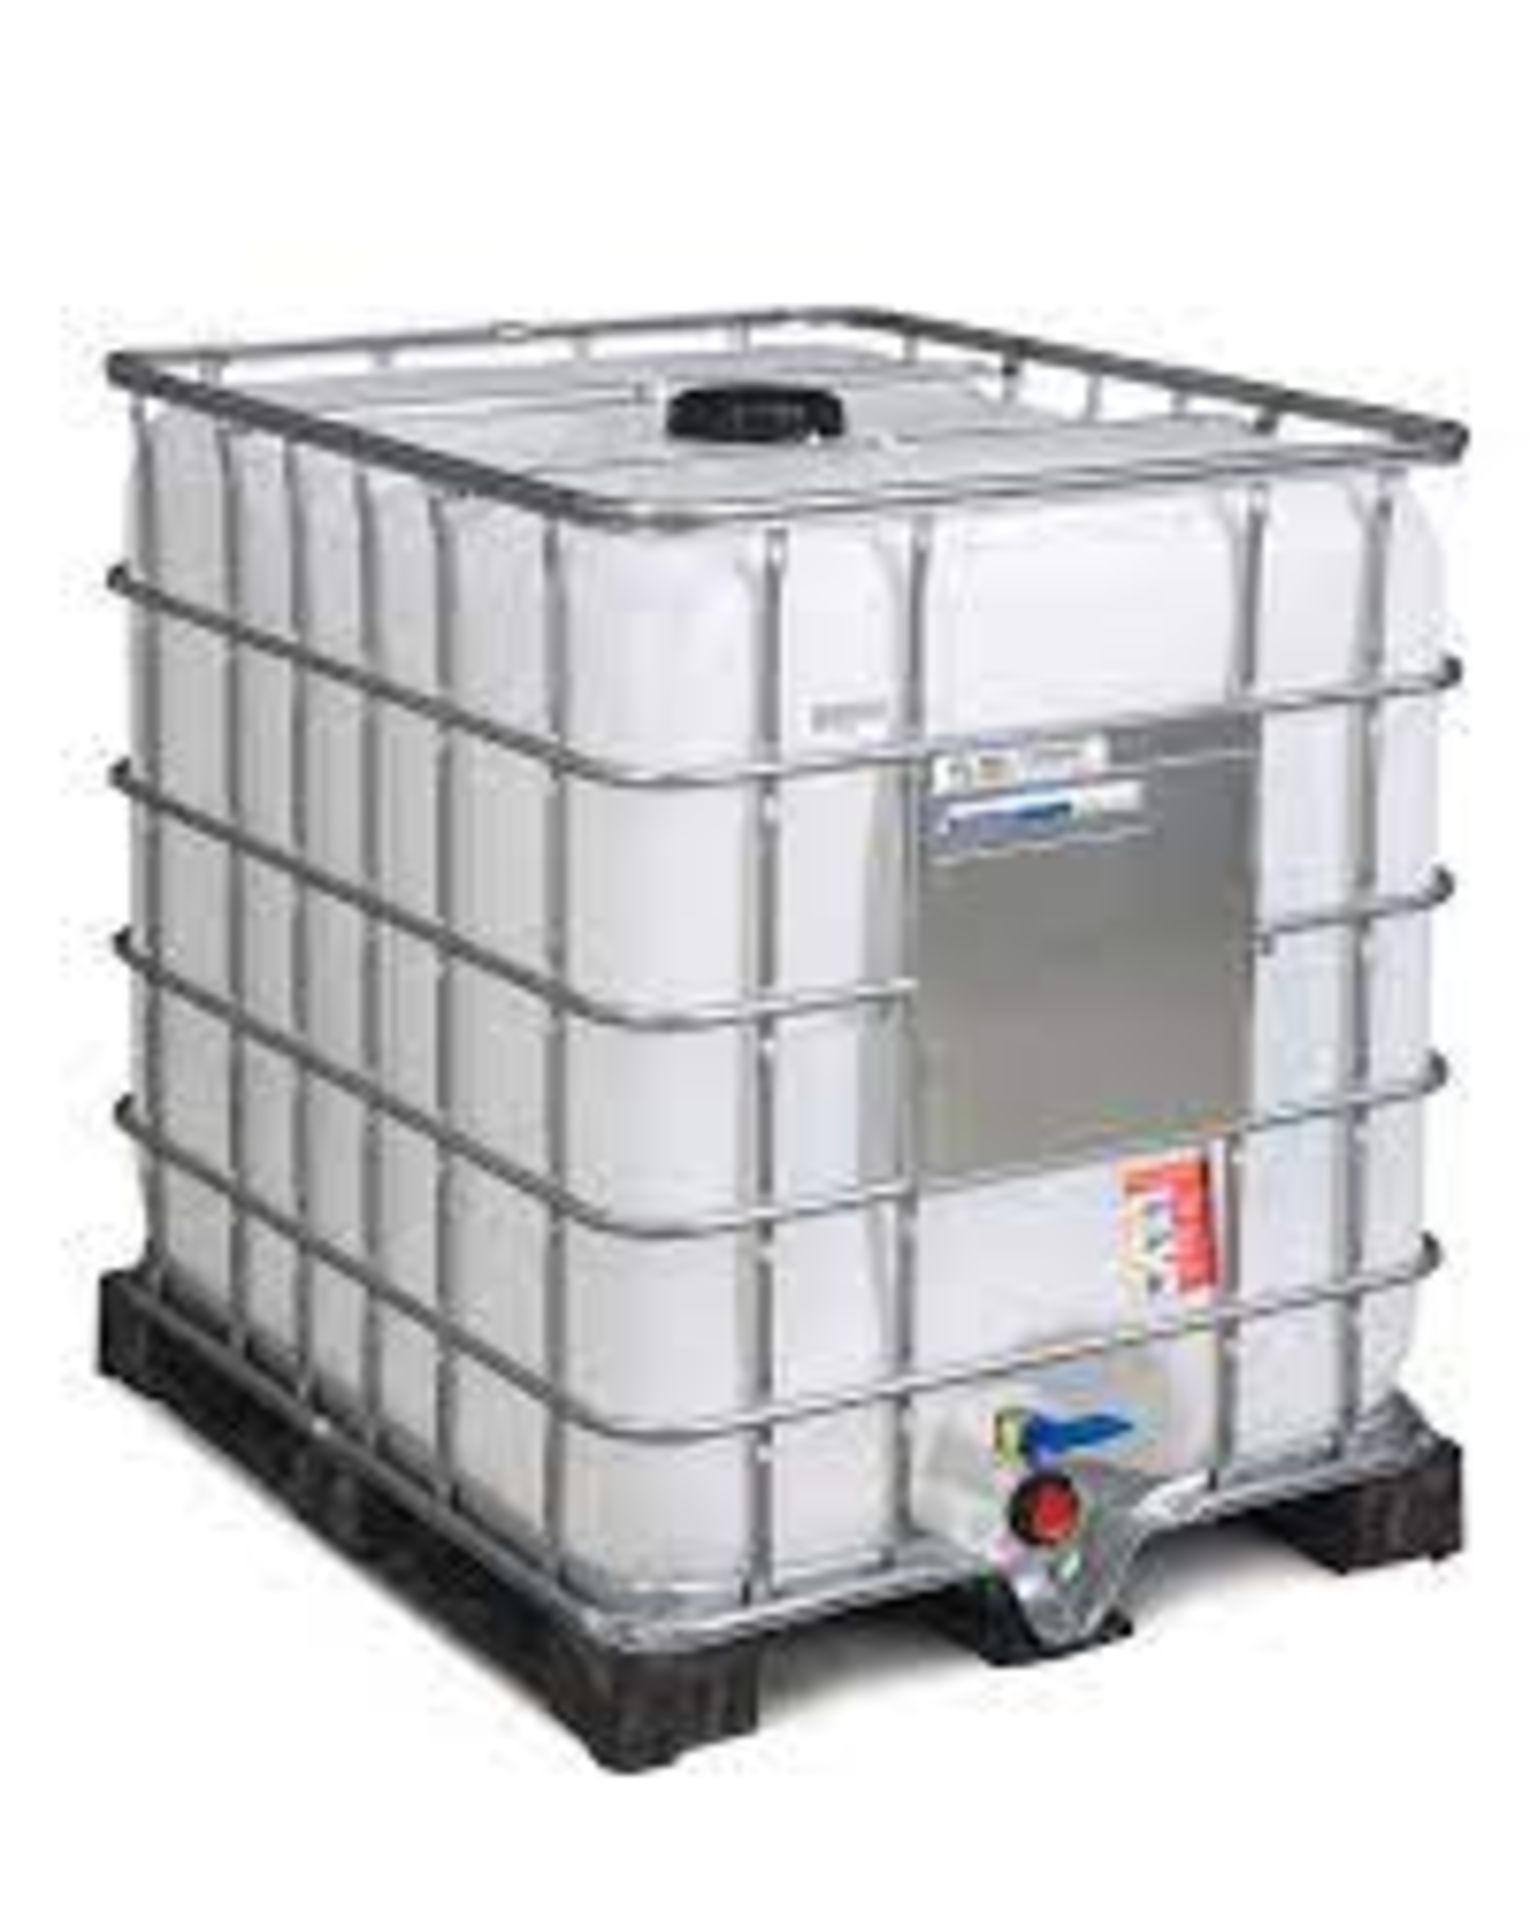 1000L GENUINE VDA CERTIFIED ADBLUE IN FREE IBC - DELIVERY NATIONWIDE ONLY £25